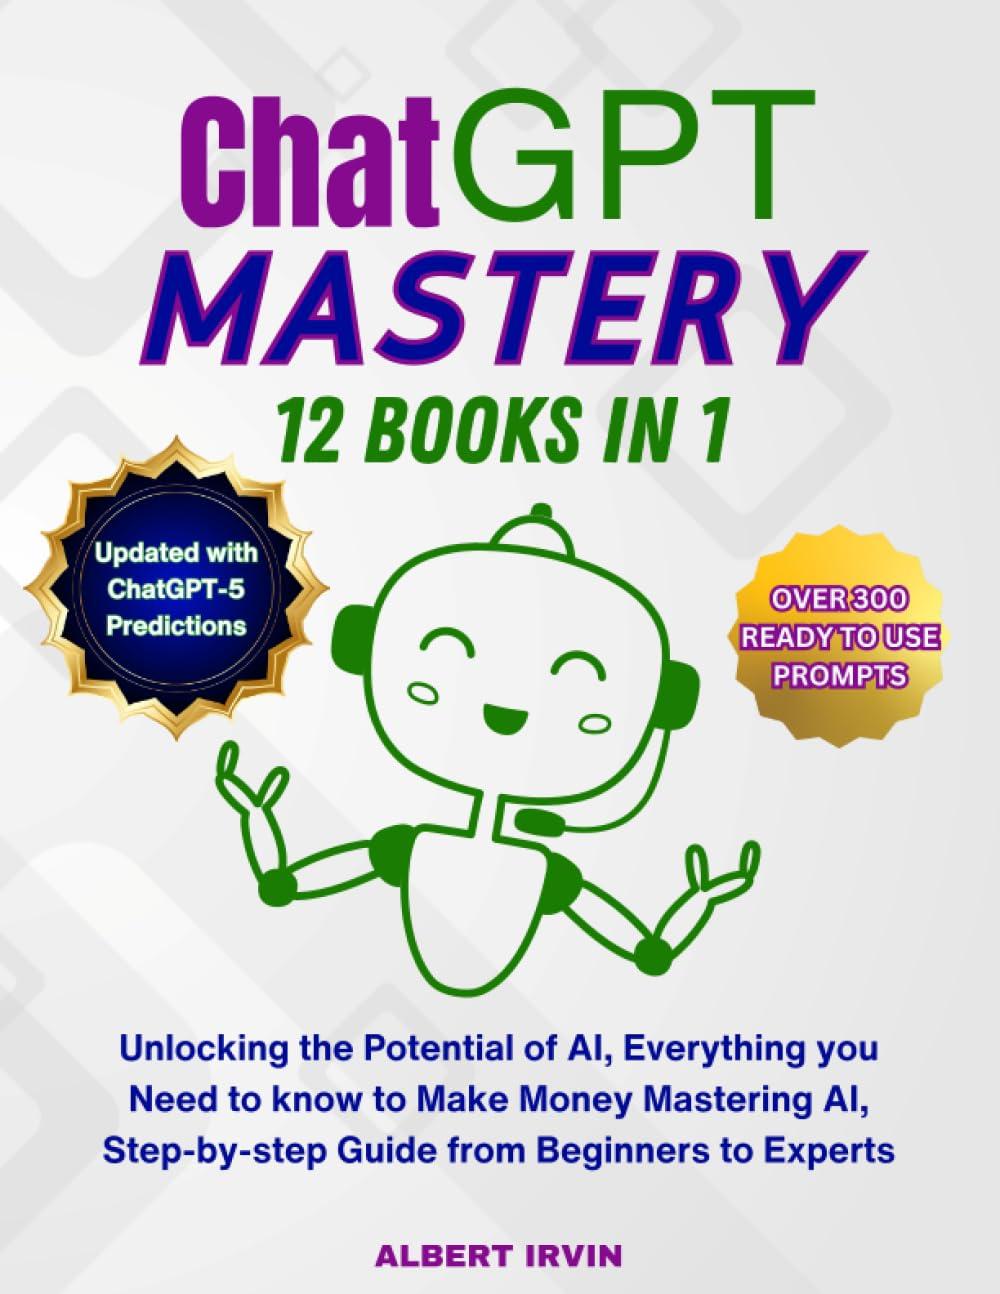 chatgpt mastery 12 books in 1 unlocking the potential of ai everything you need to know to make money